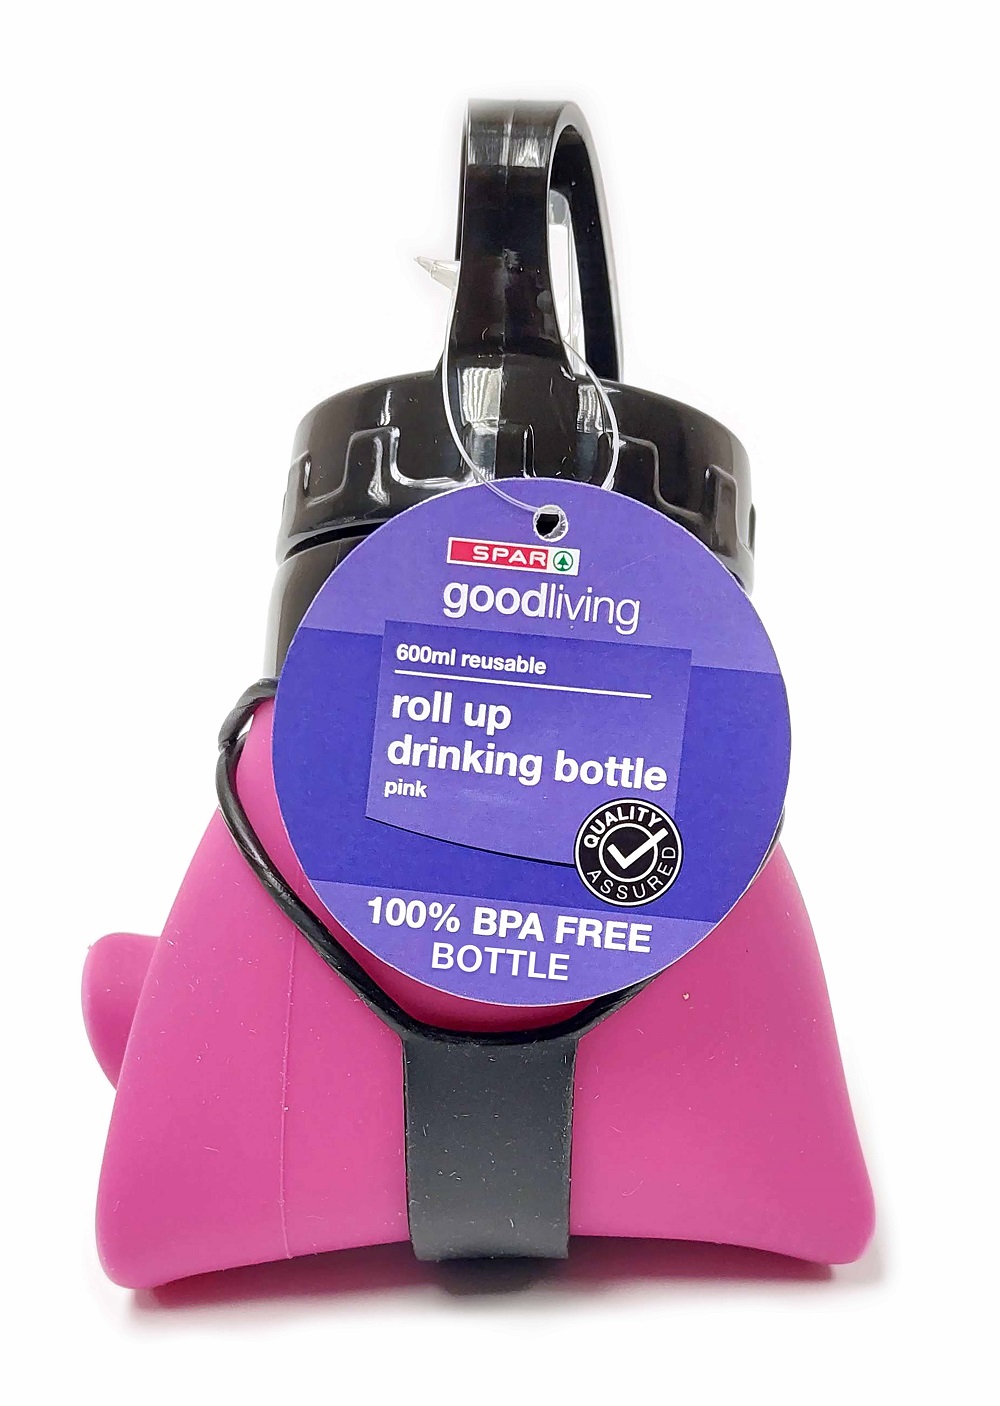 roll up drinking bottle pink 